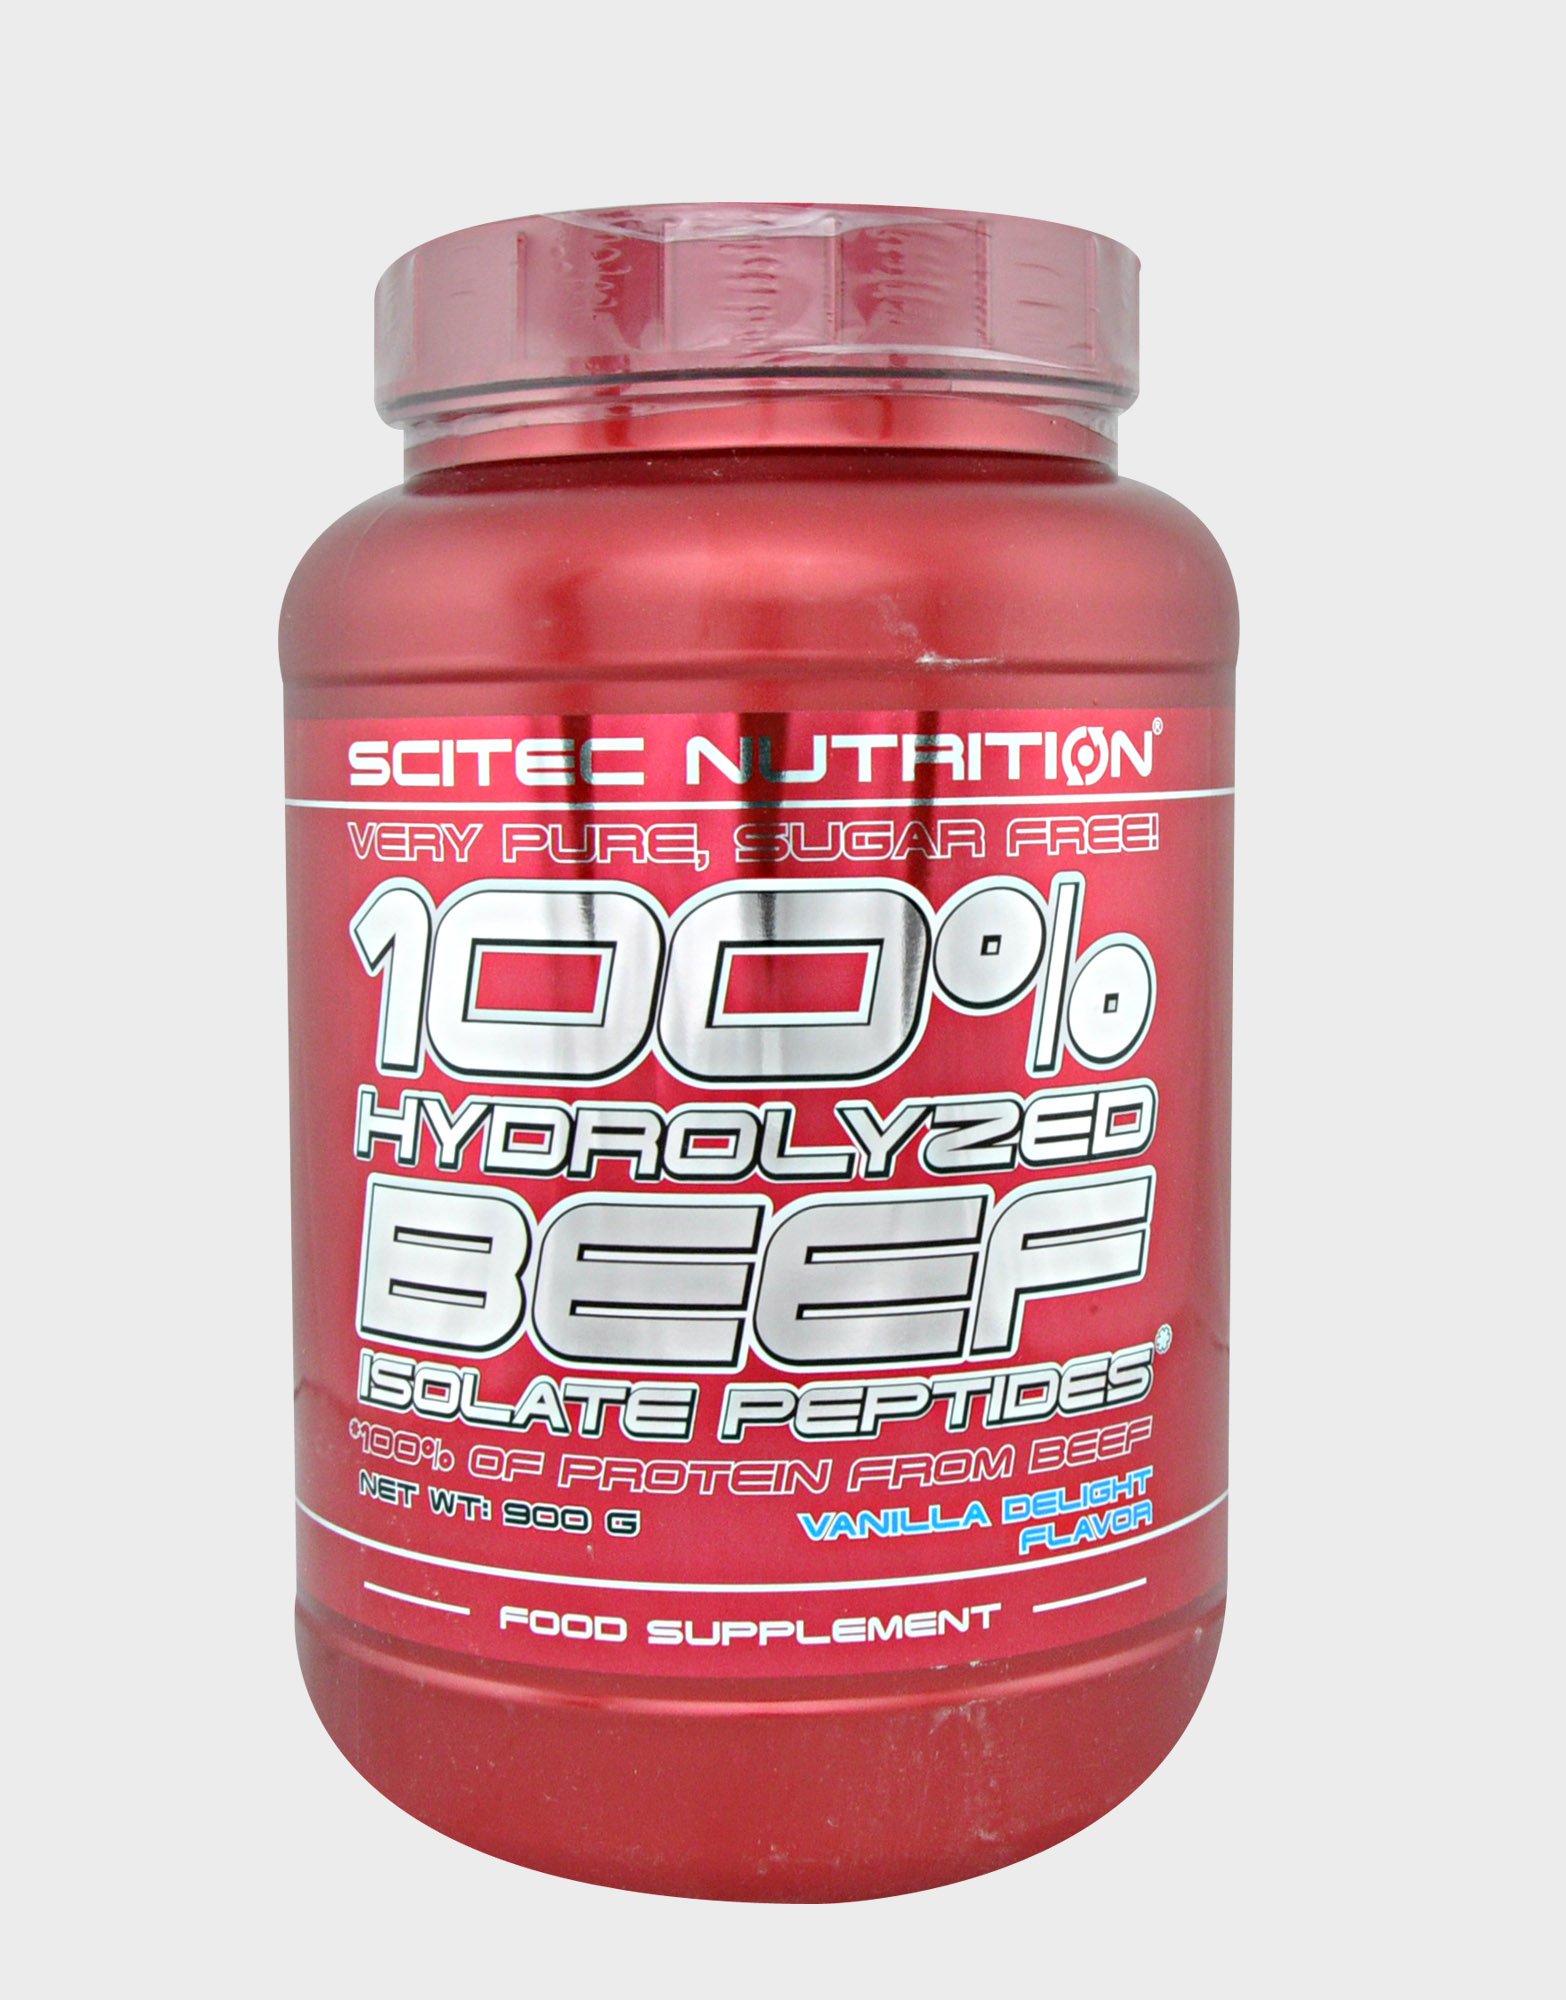 100% Hydrolyzed Beef, 900 g, Scitec Nutrition. Beef protein. 